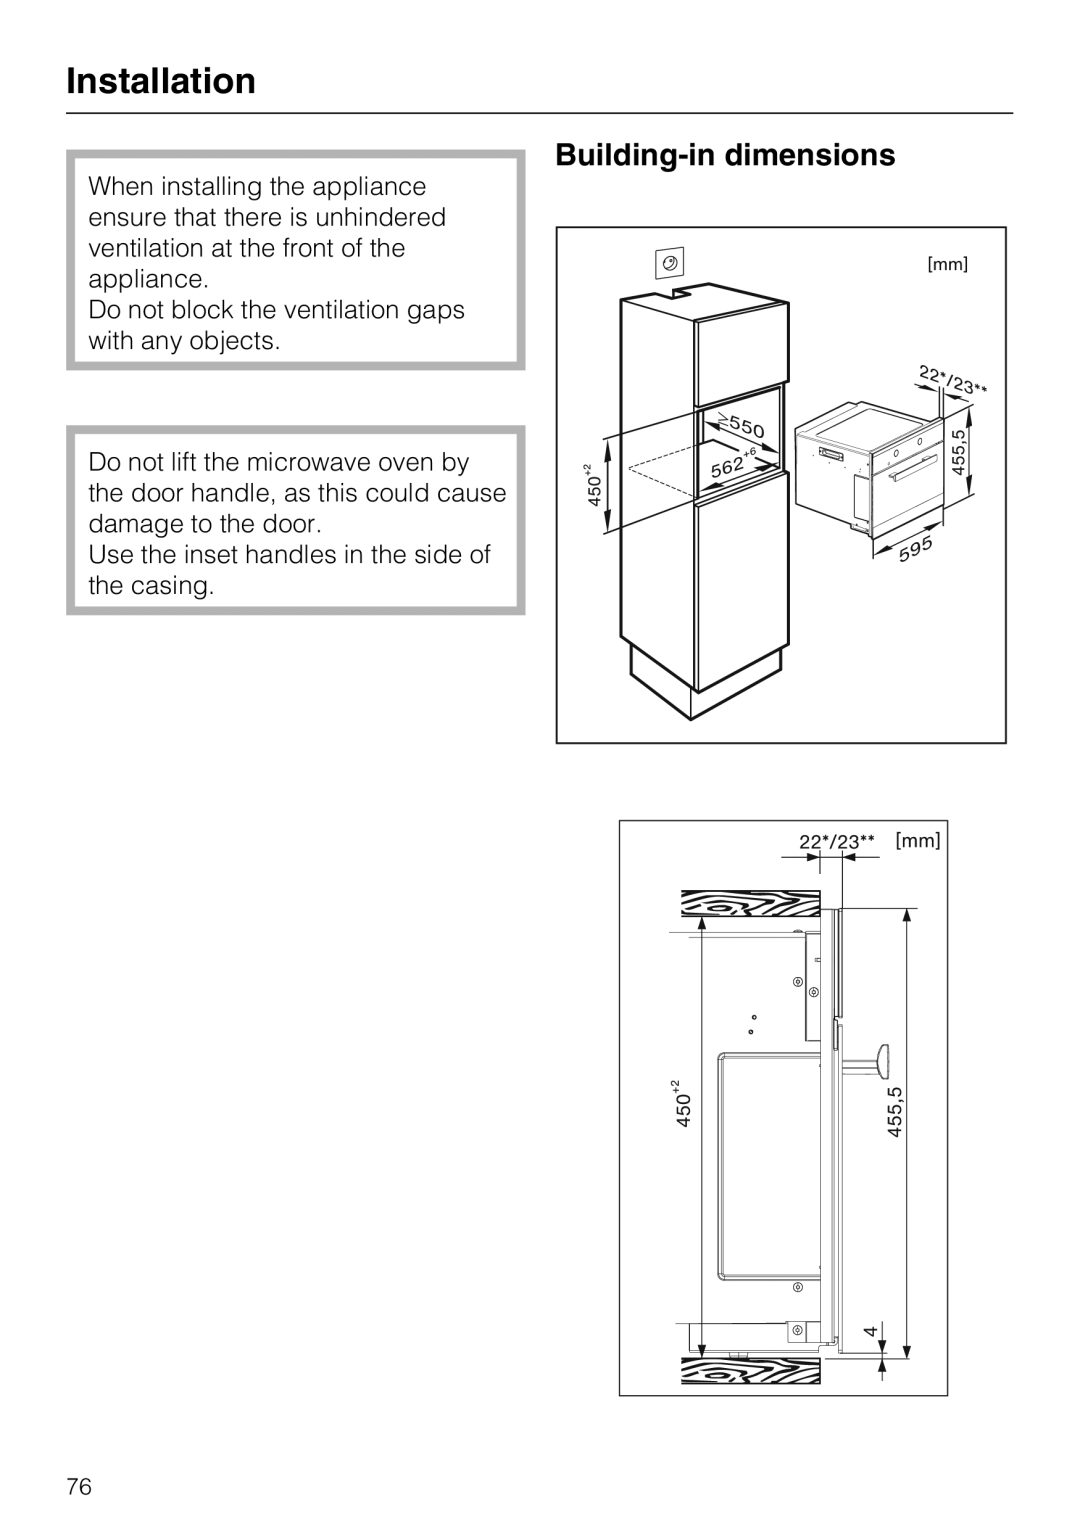 Miele 09 919 100 operating instructions Installation, Building-indimensions 